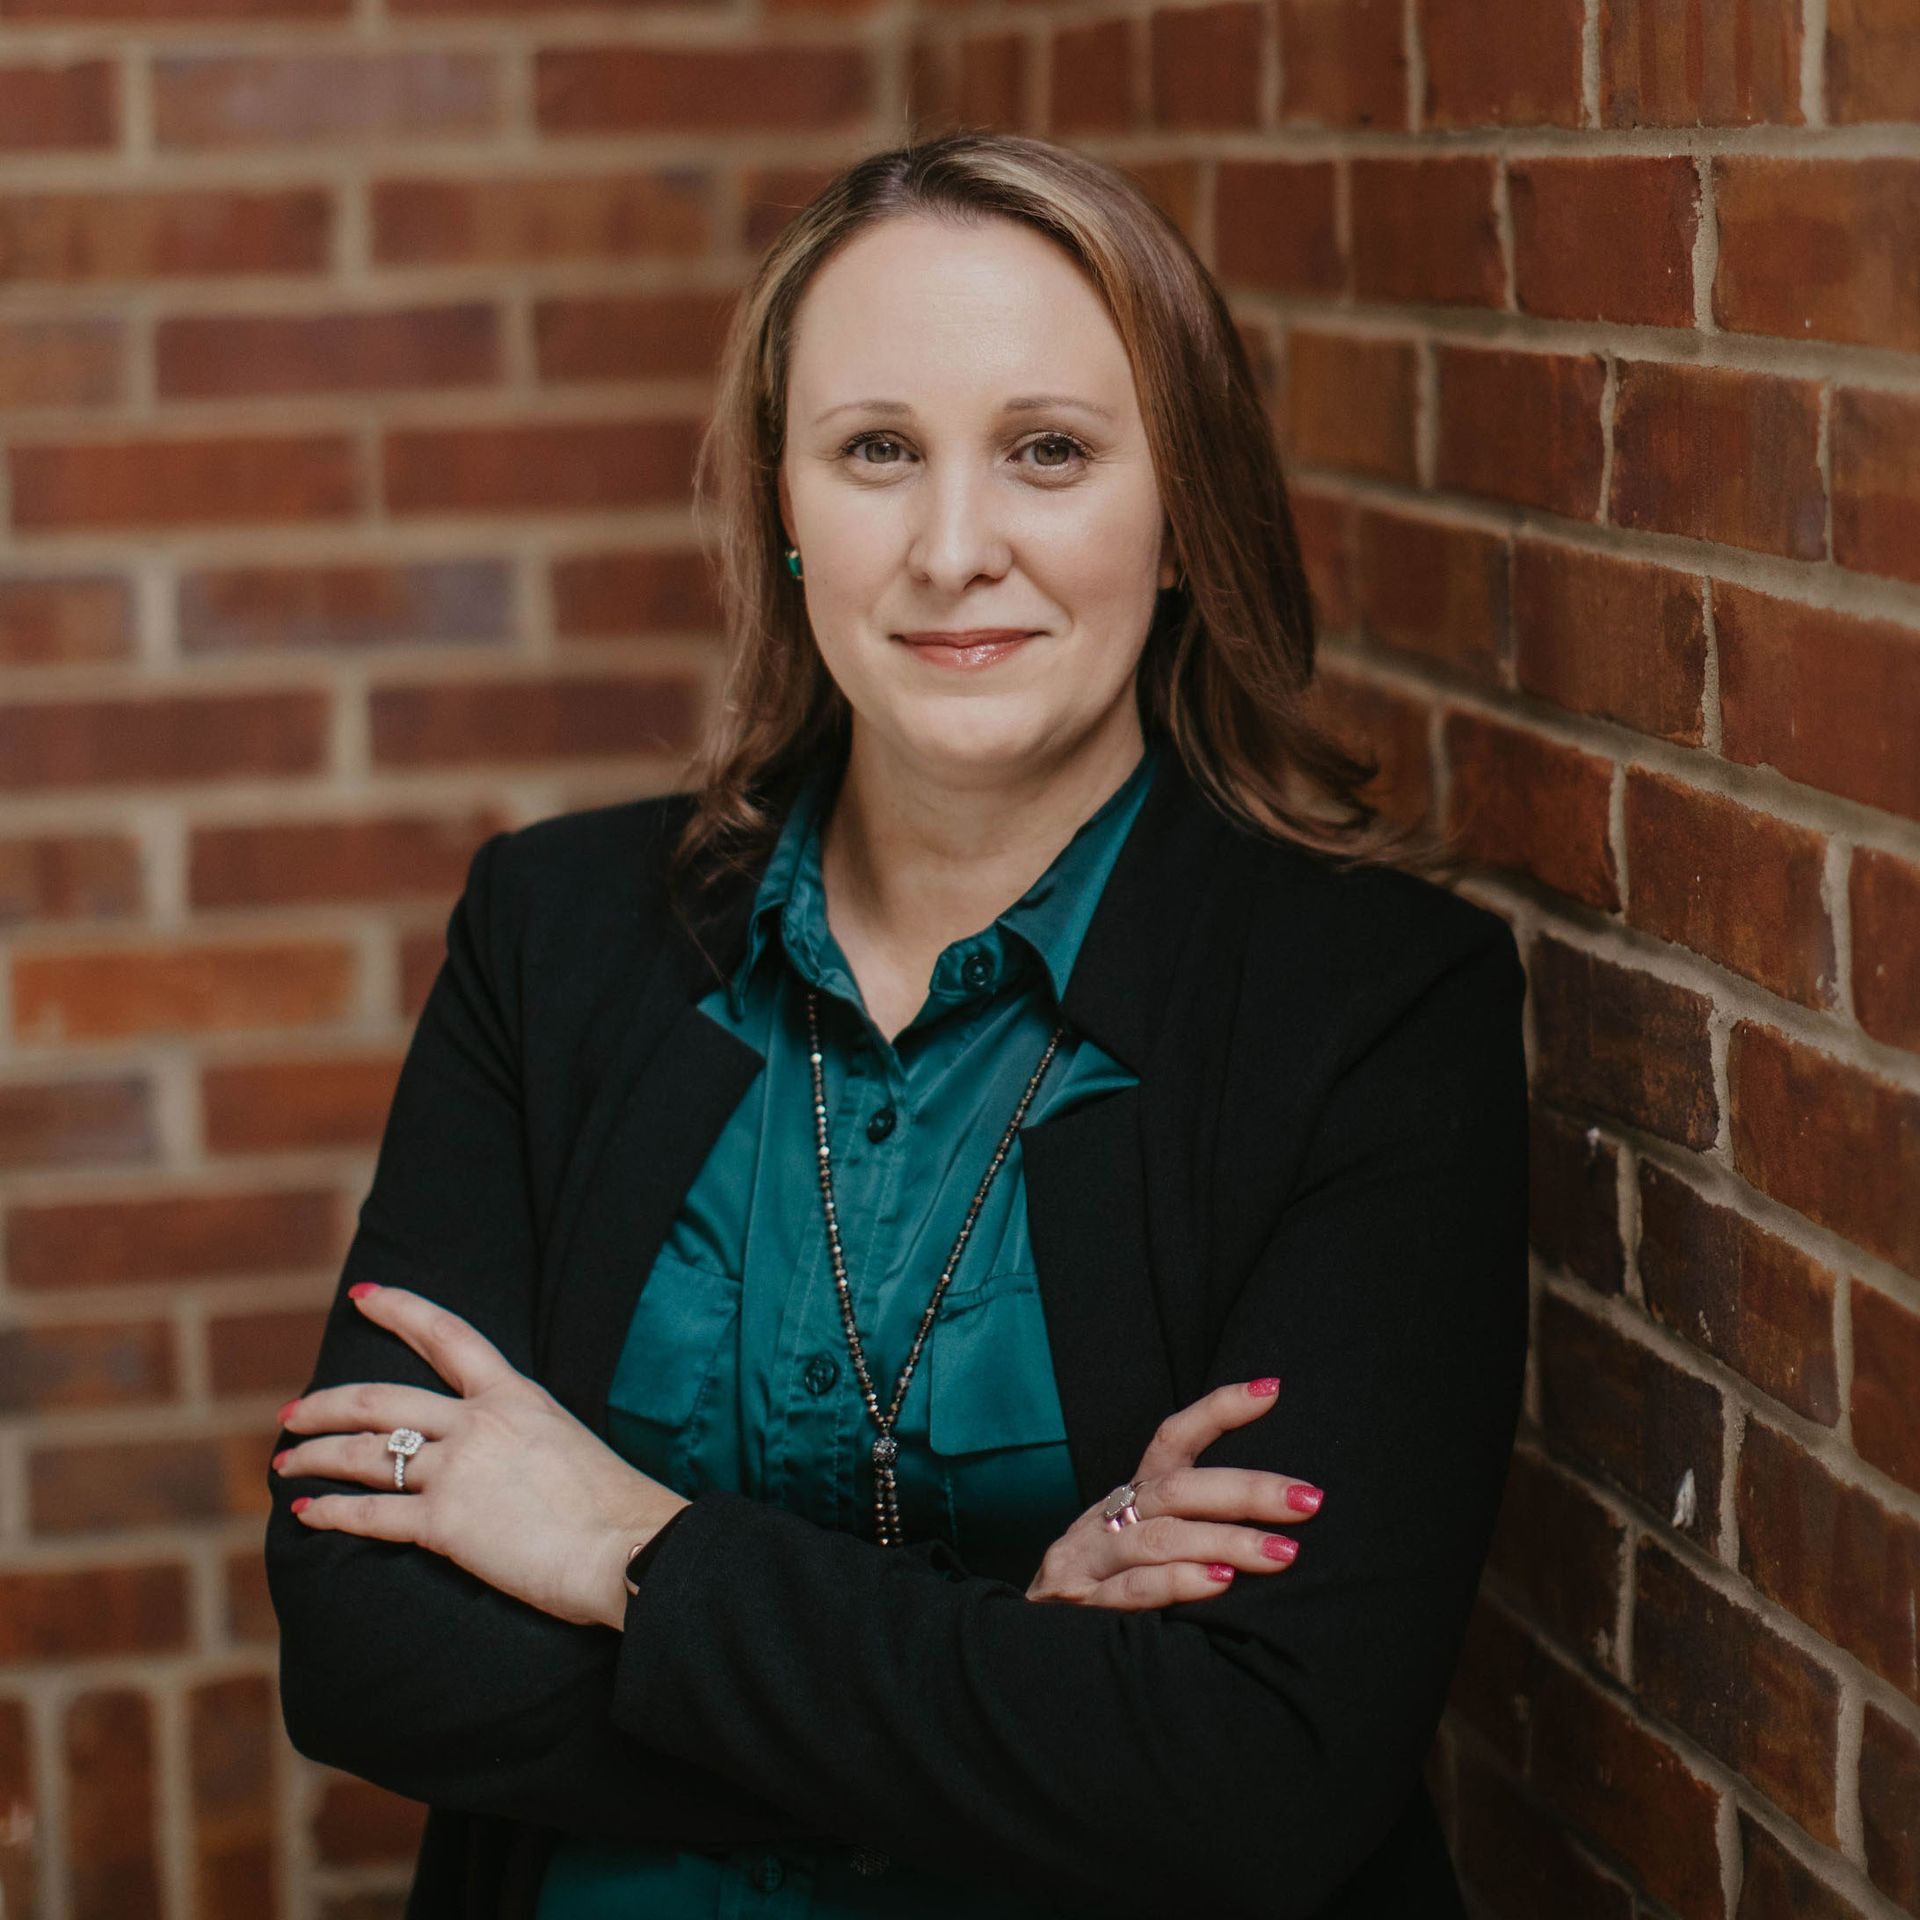 Carrie Stephens, Administrator